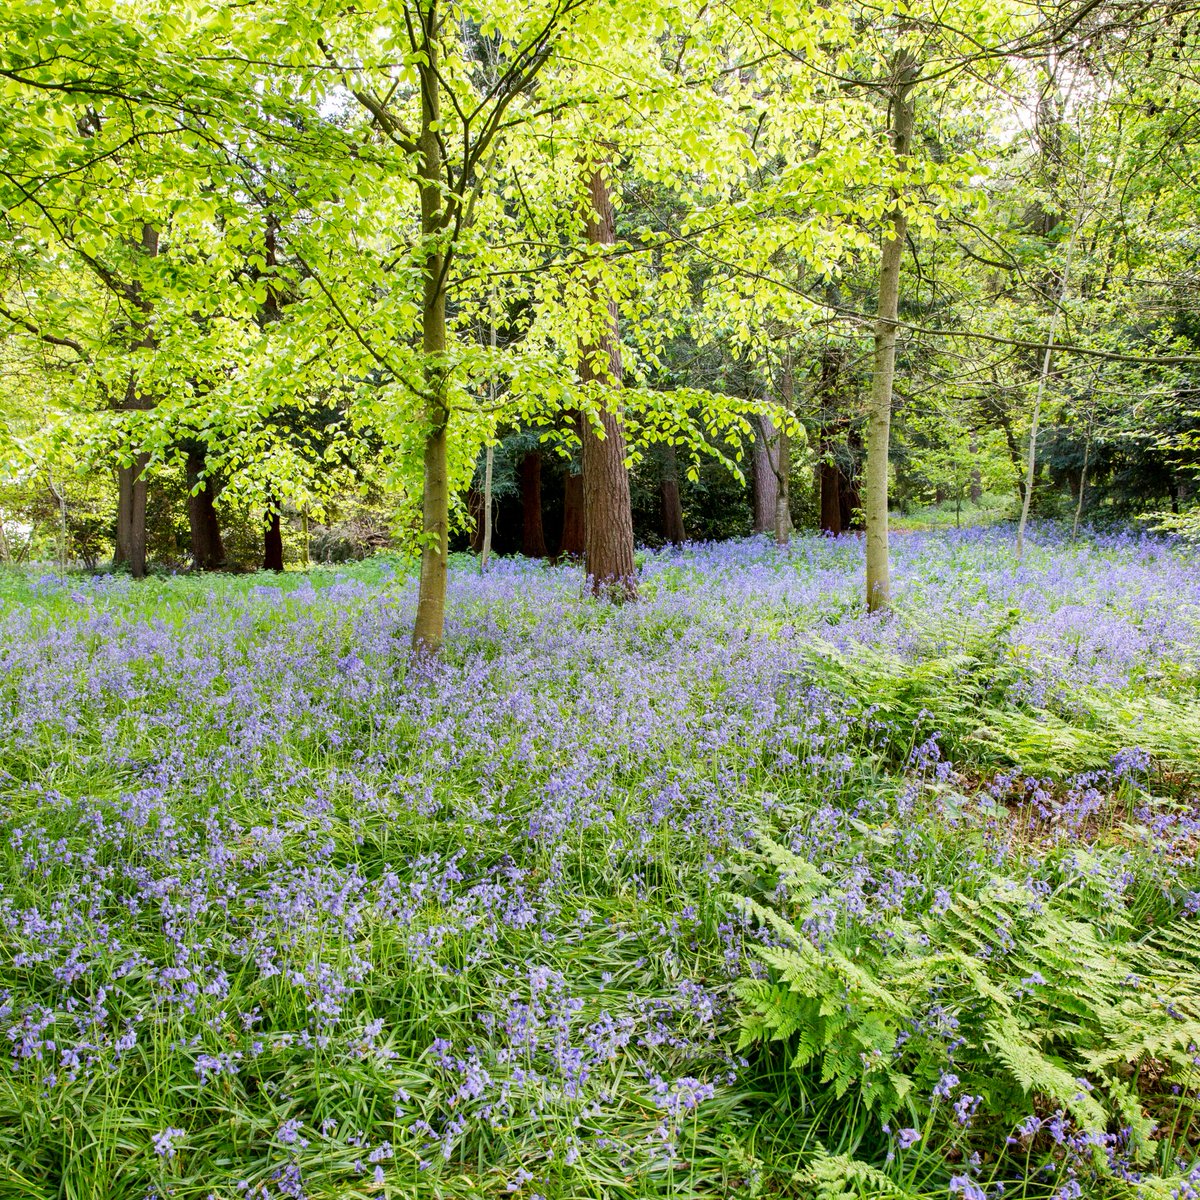 Take a stroll through the Pleasure Ground Wood area of the garden where you’ll discover woodland floors carpeted with bluebells. These magical bell-shaped flowers are one of the spring highlights here at Chirk Castle, where they're coming into their prime. bit.ly/43i6K0v